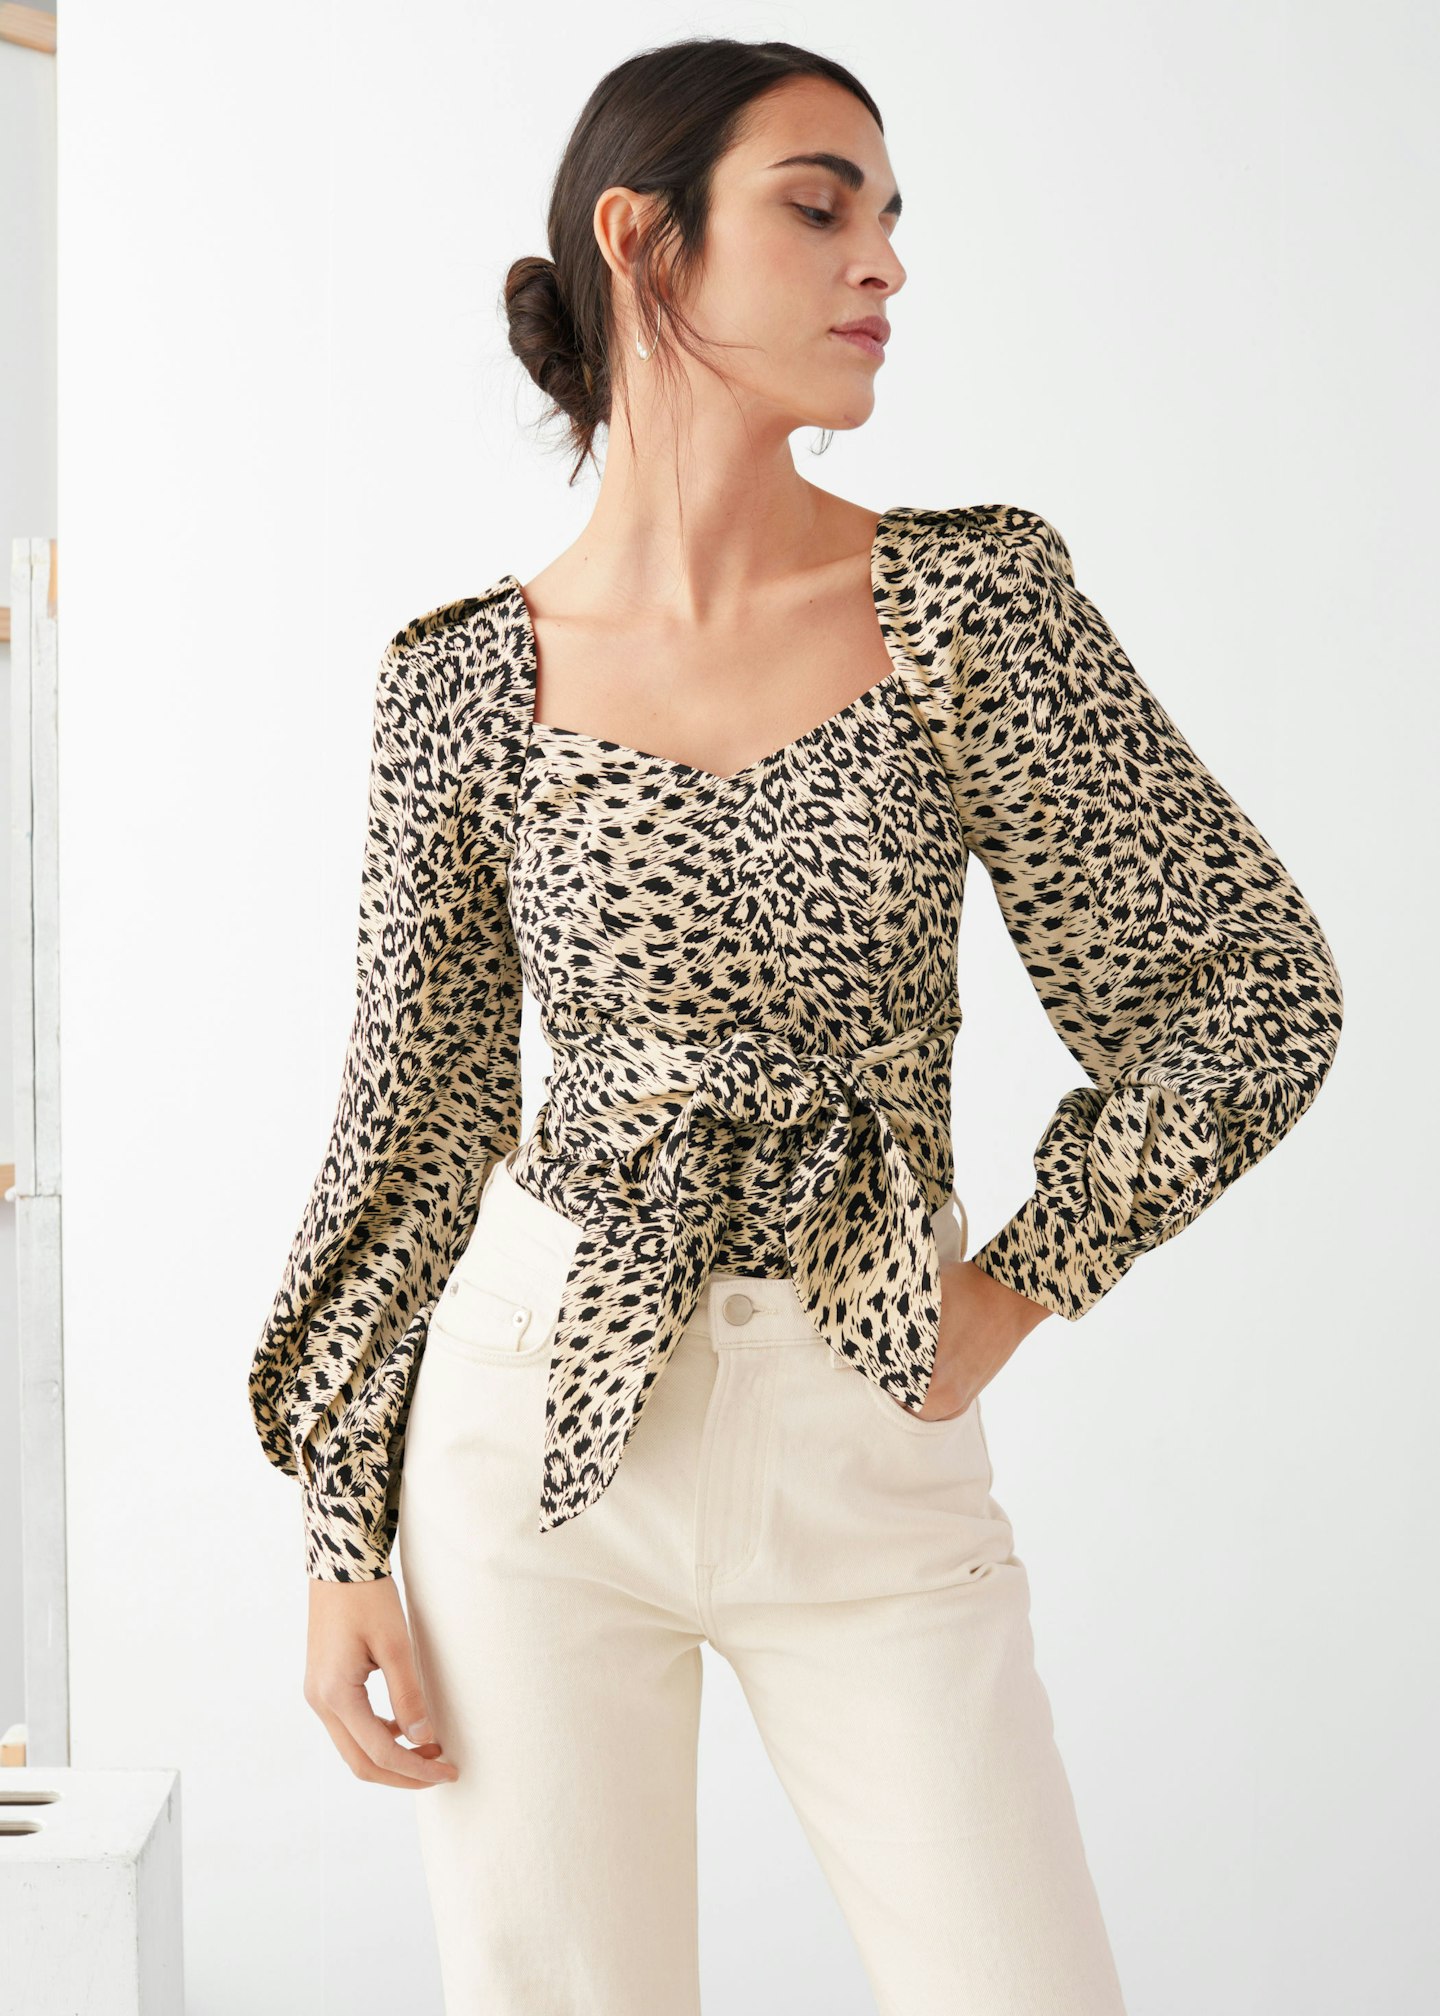 & Other Stories, Leopard Knot Tie Blouse, £65